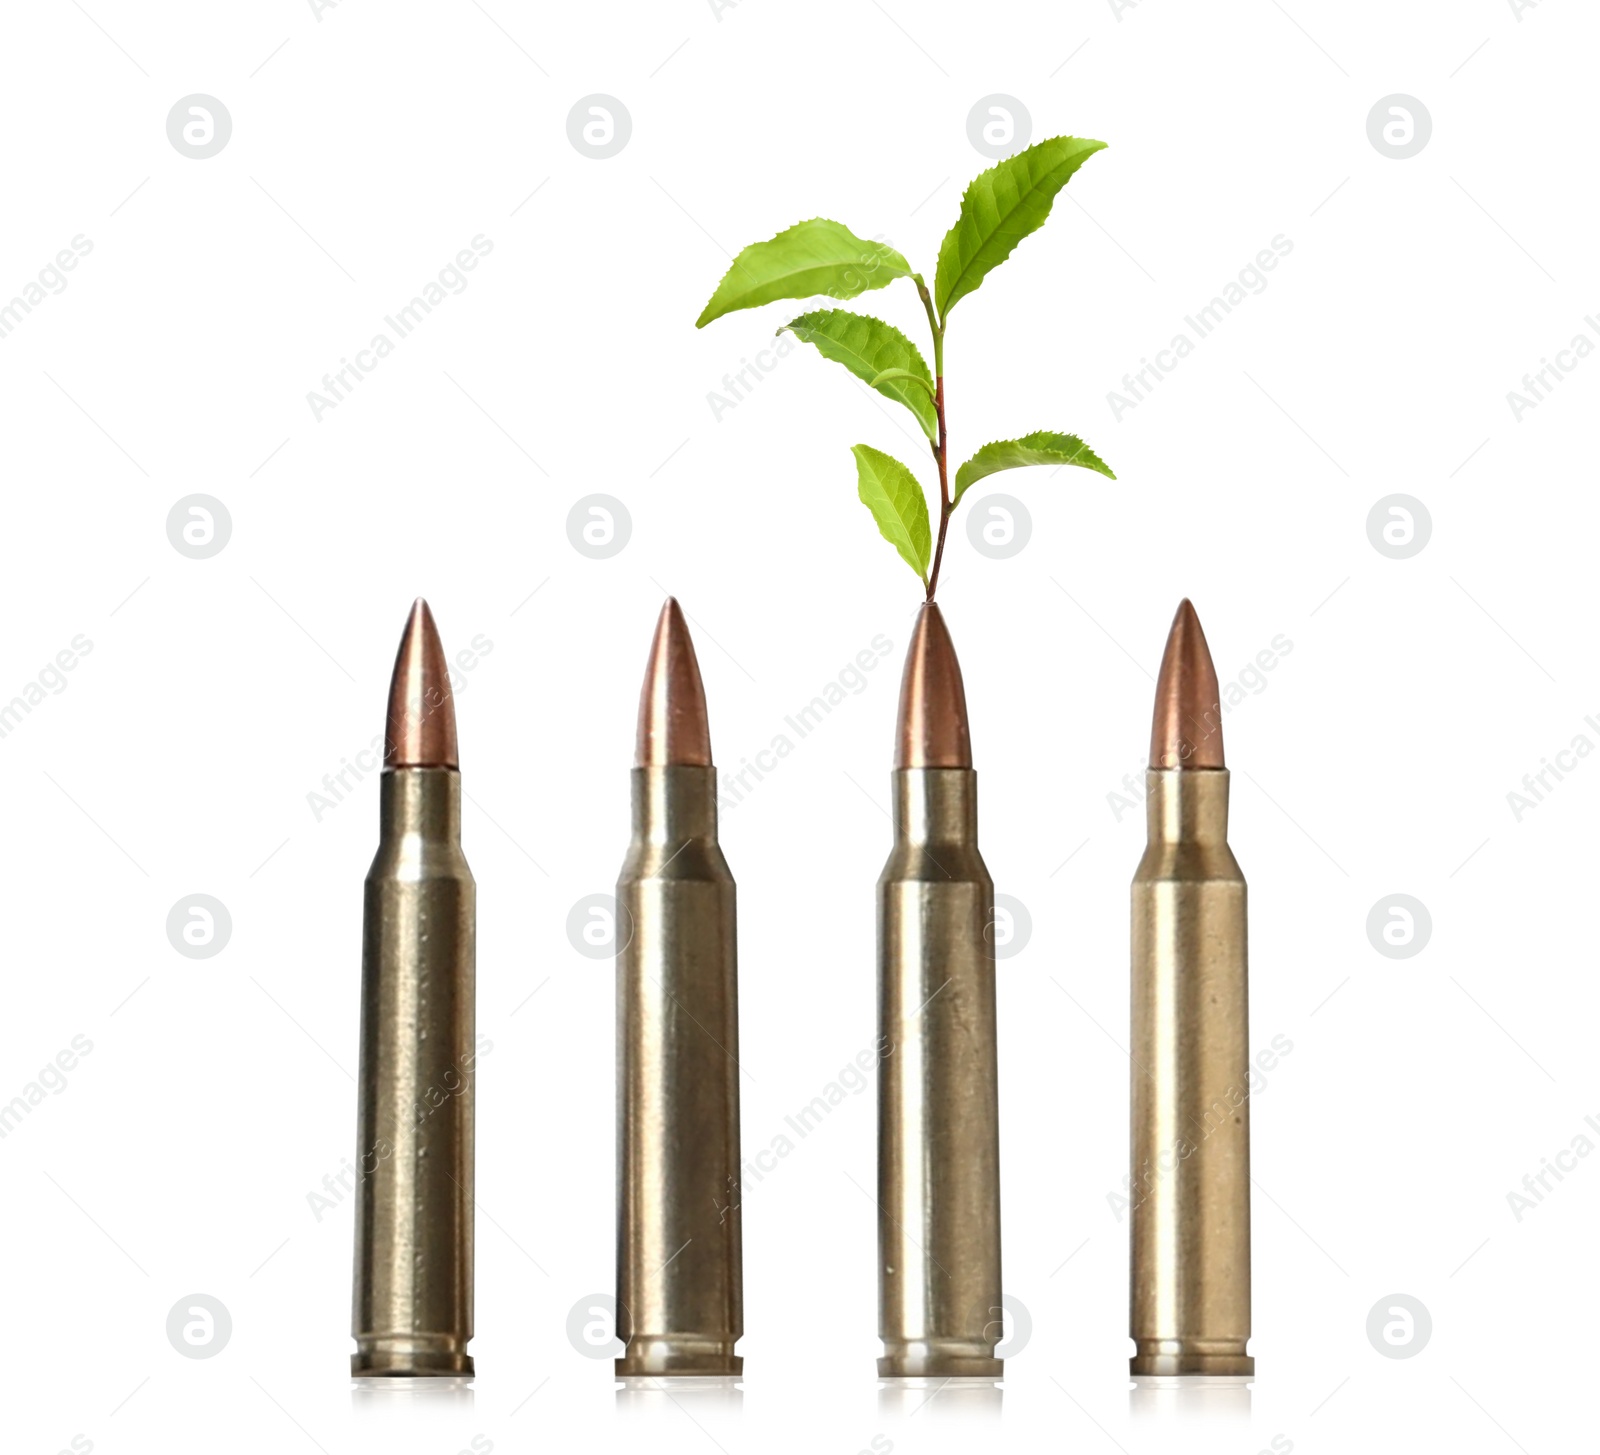 Image of Branch with green leaves and bullets on white background. Peace instead of war